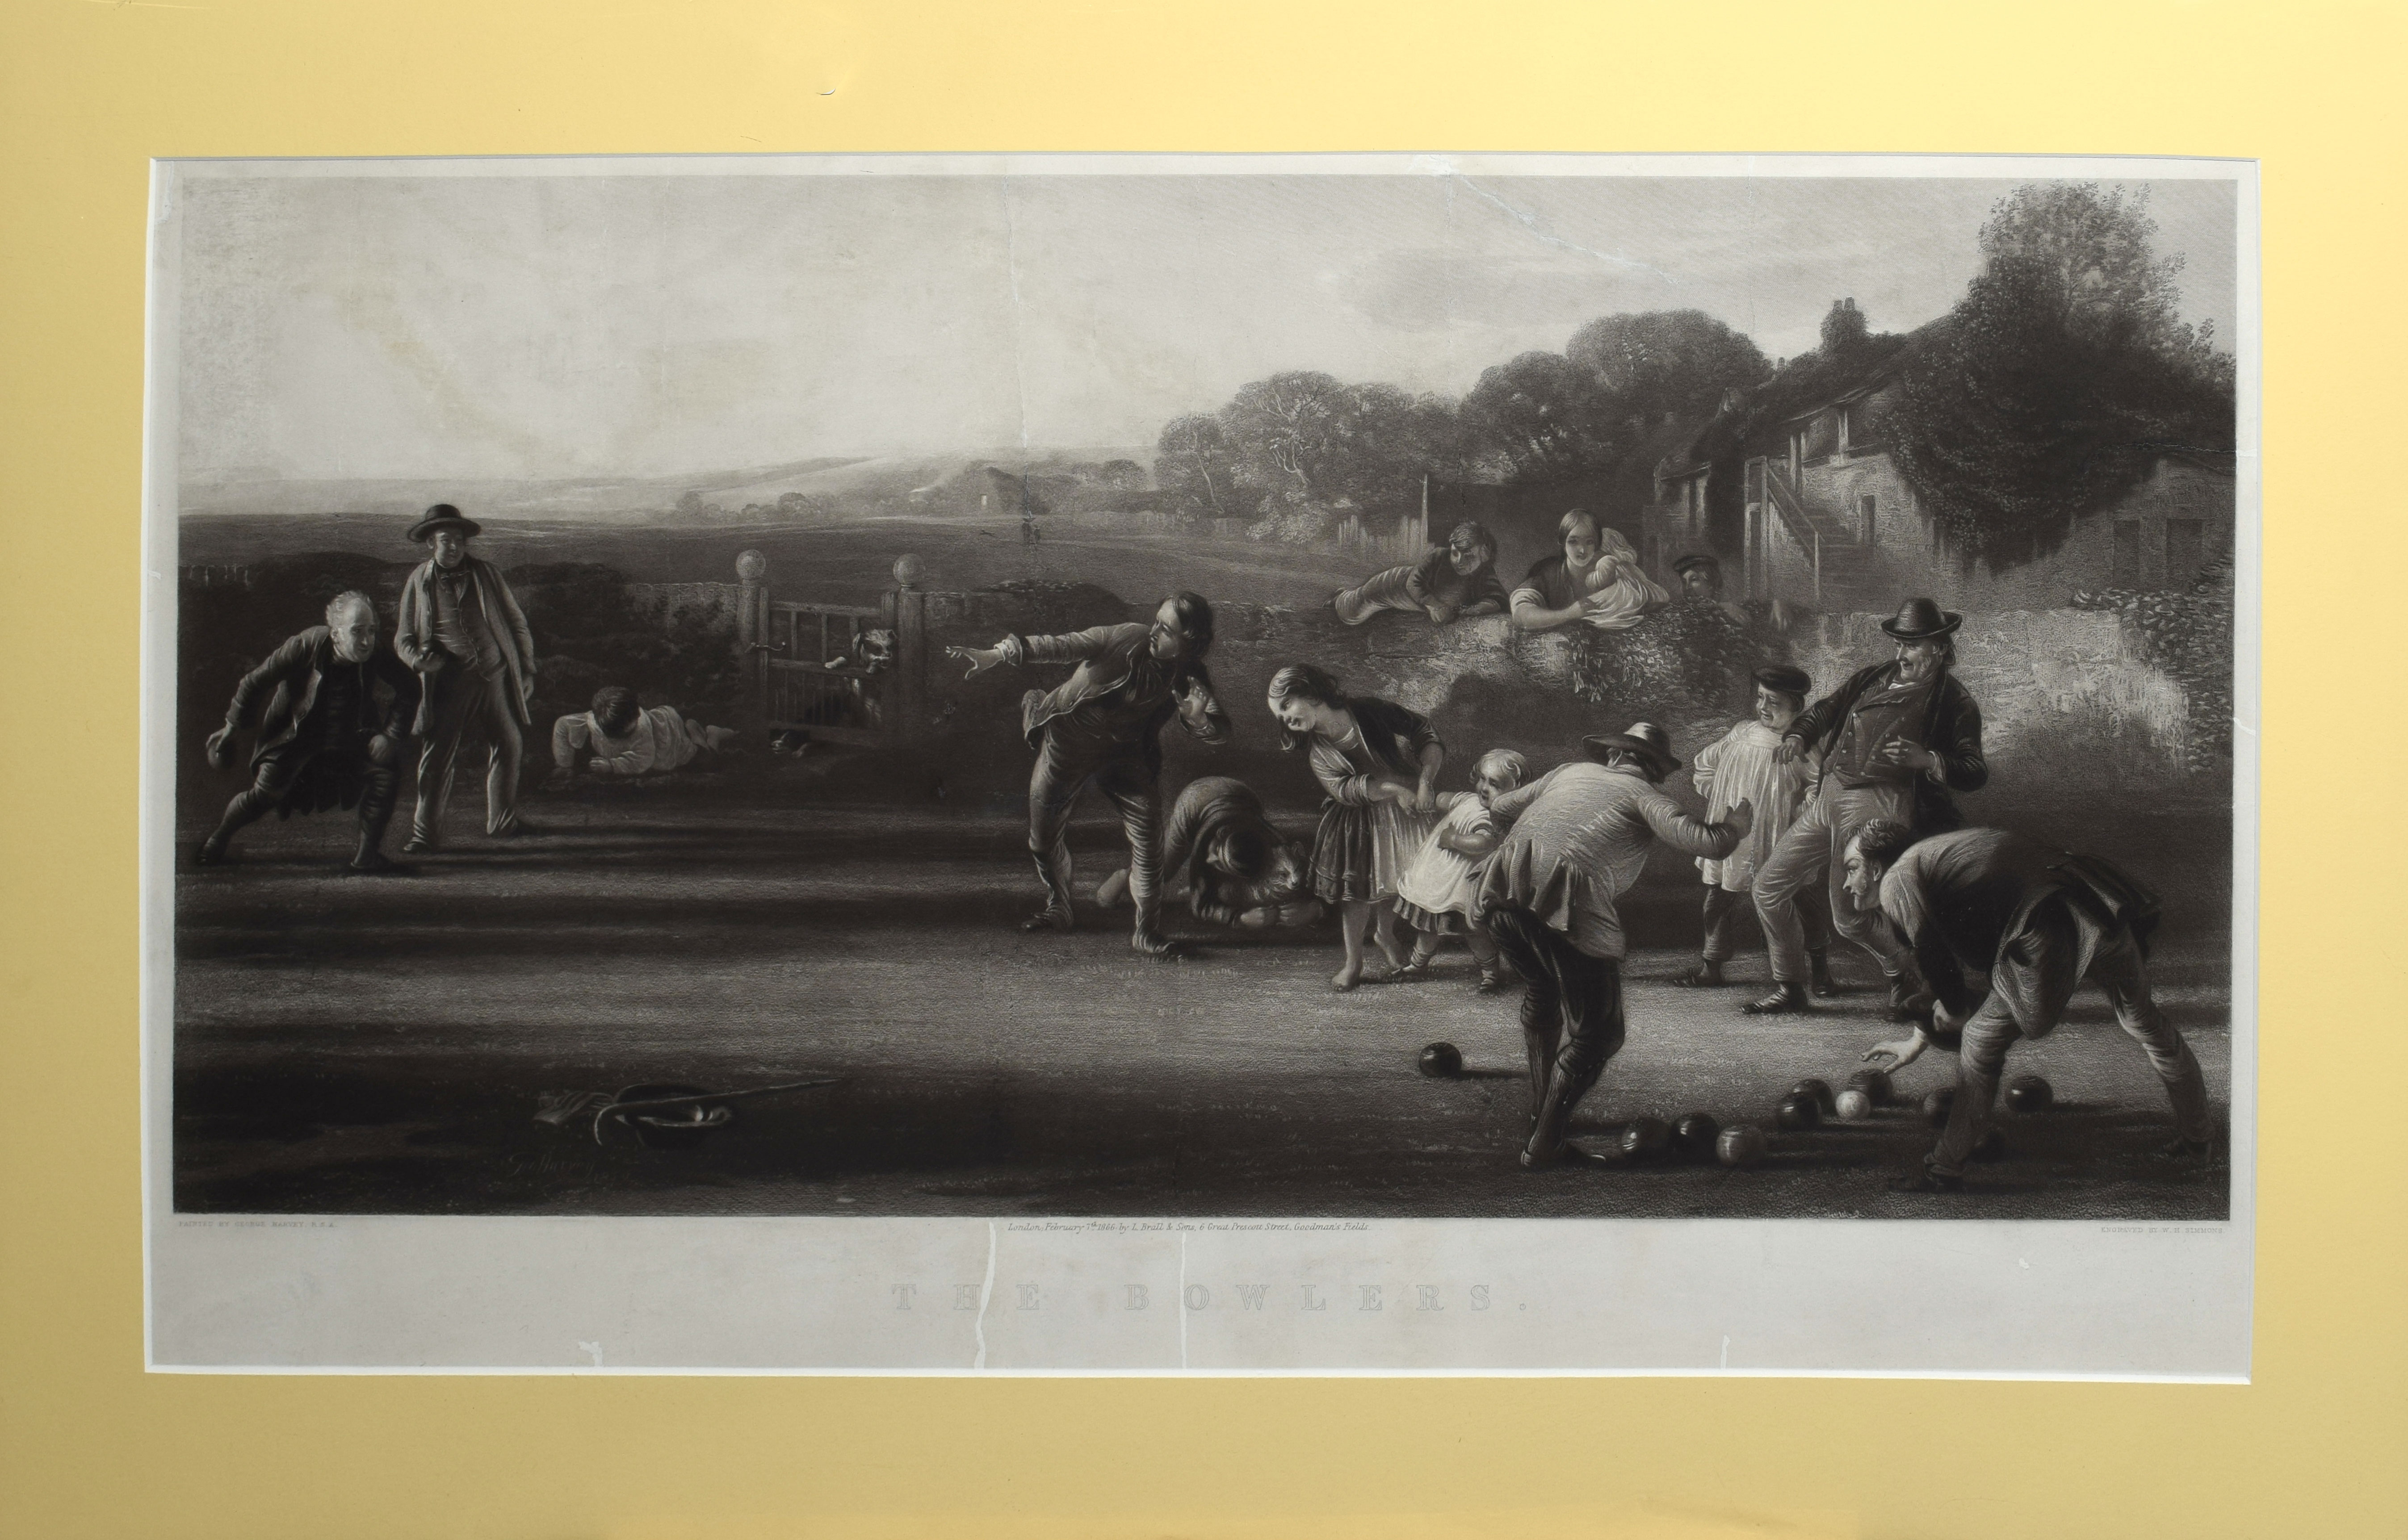 After George Harvey, engraved by W H Simmons, "The Bowlers", black and white mezzotint, published by